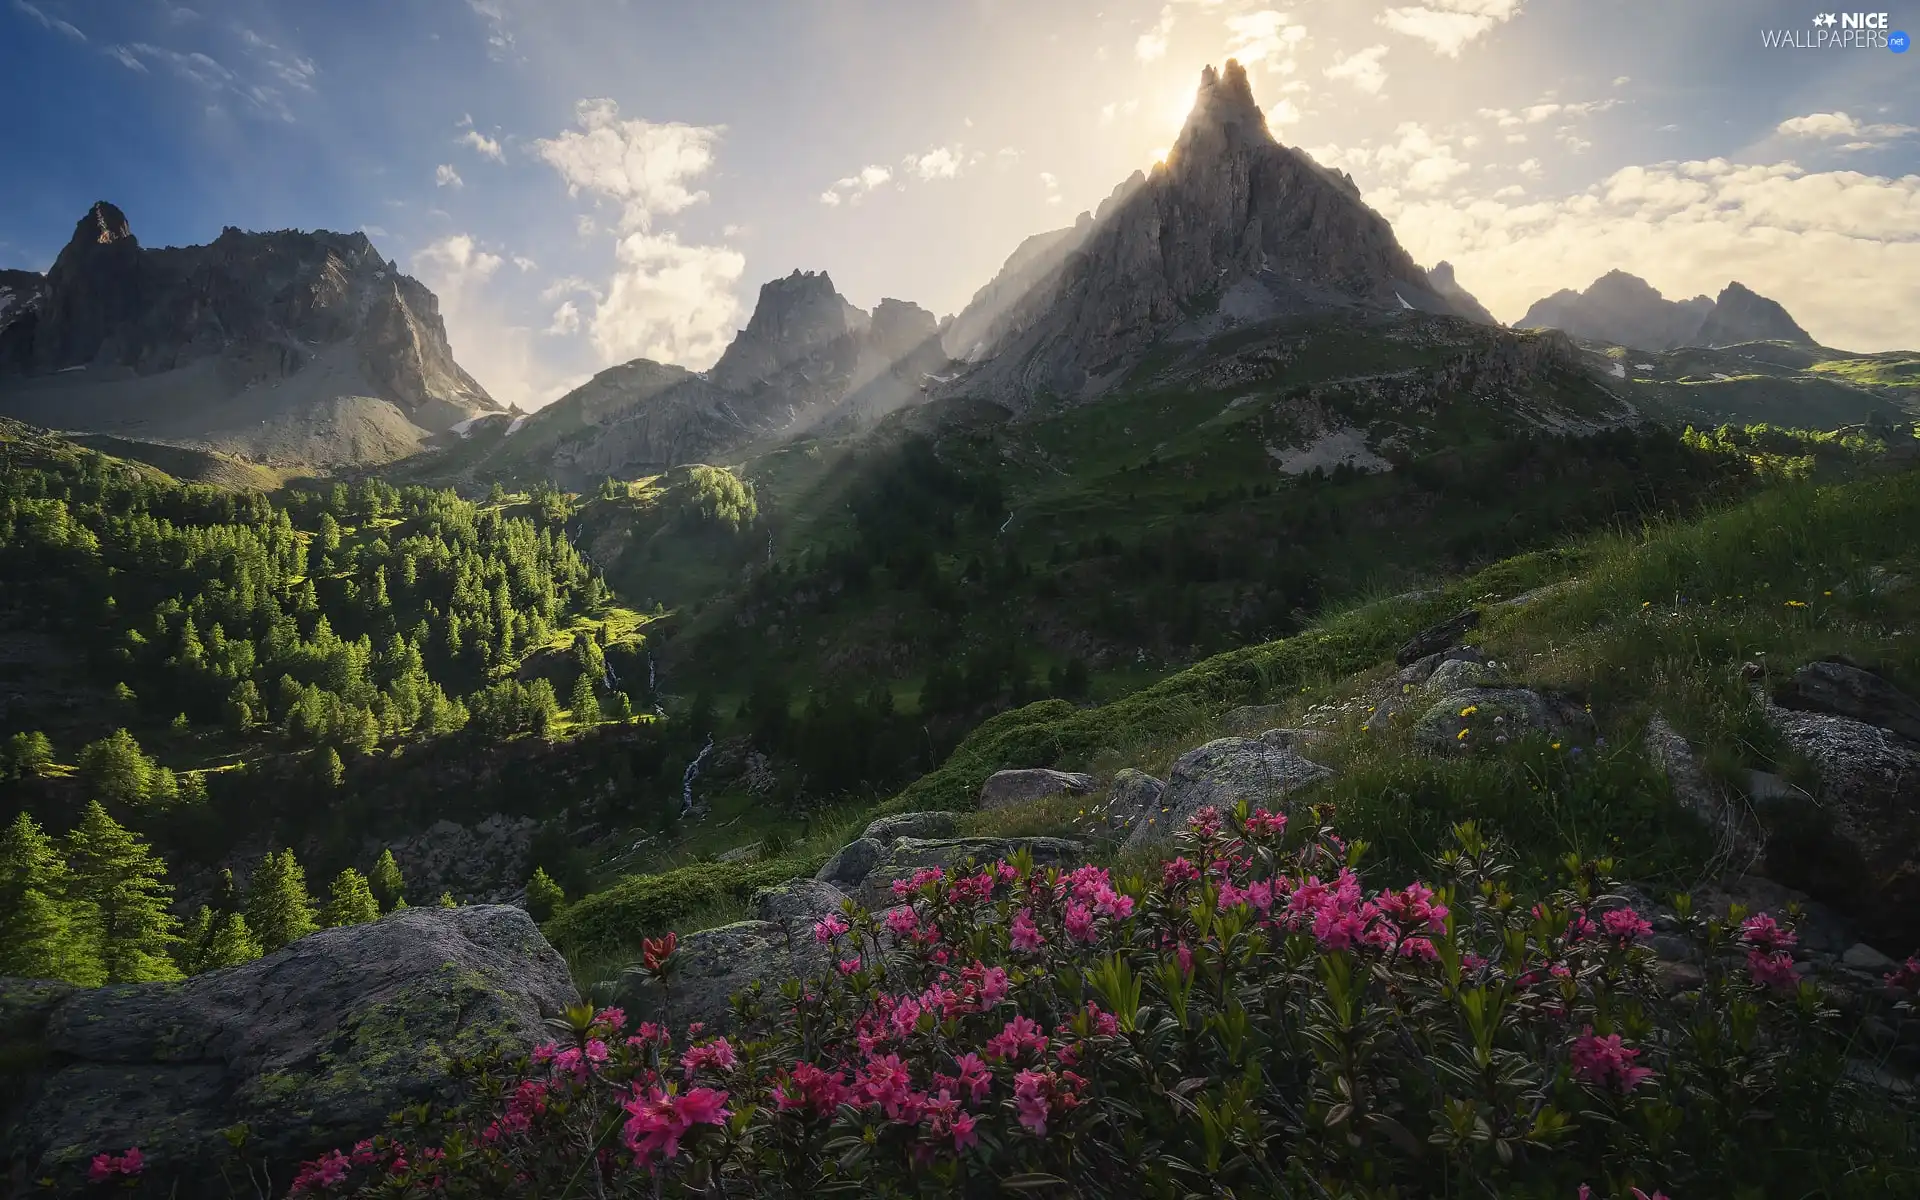 rocks, Mountains, trees, viewes, Flowers, light breaking through sky